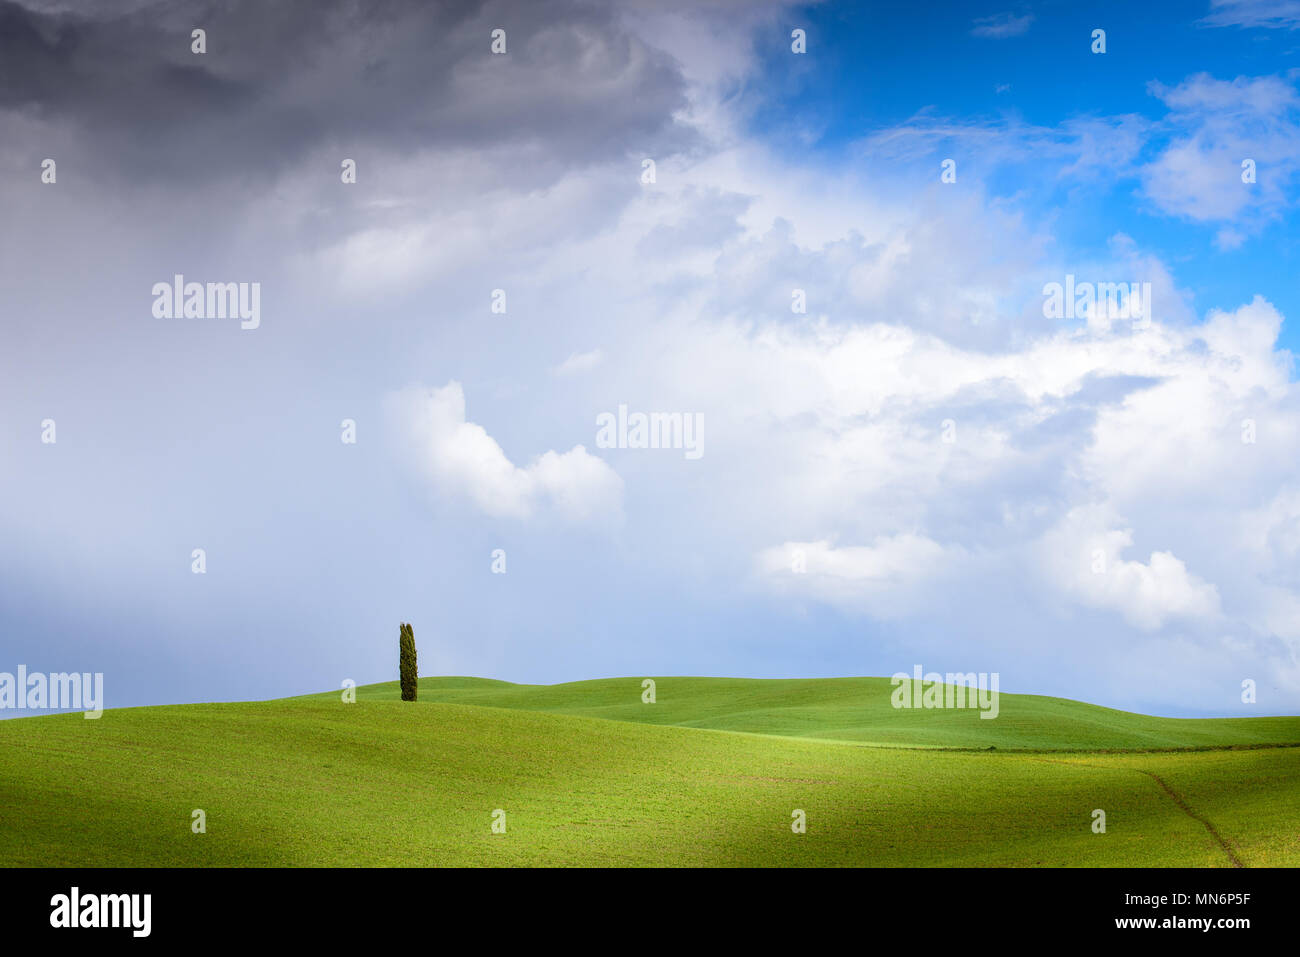 Tuscany Landscape Lonely Tree Rolling Hills With Cloud Shadows And